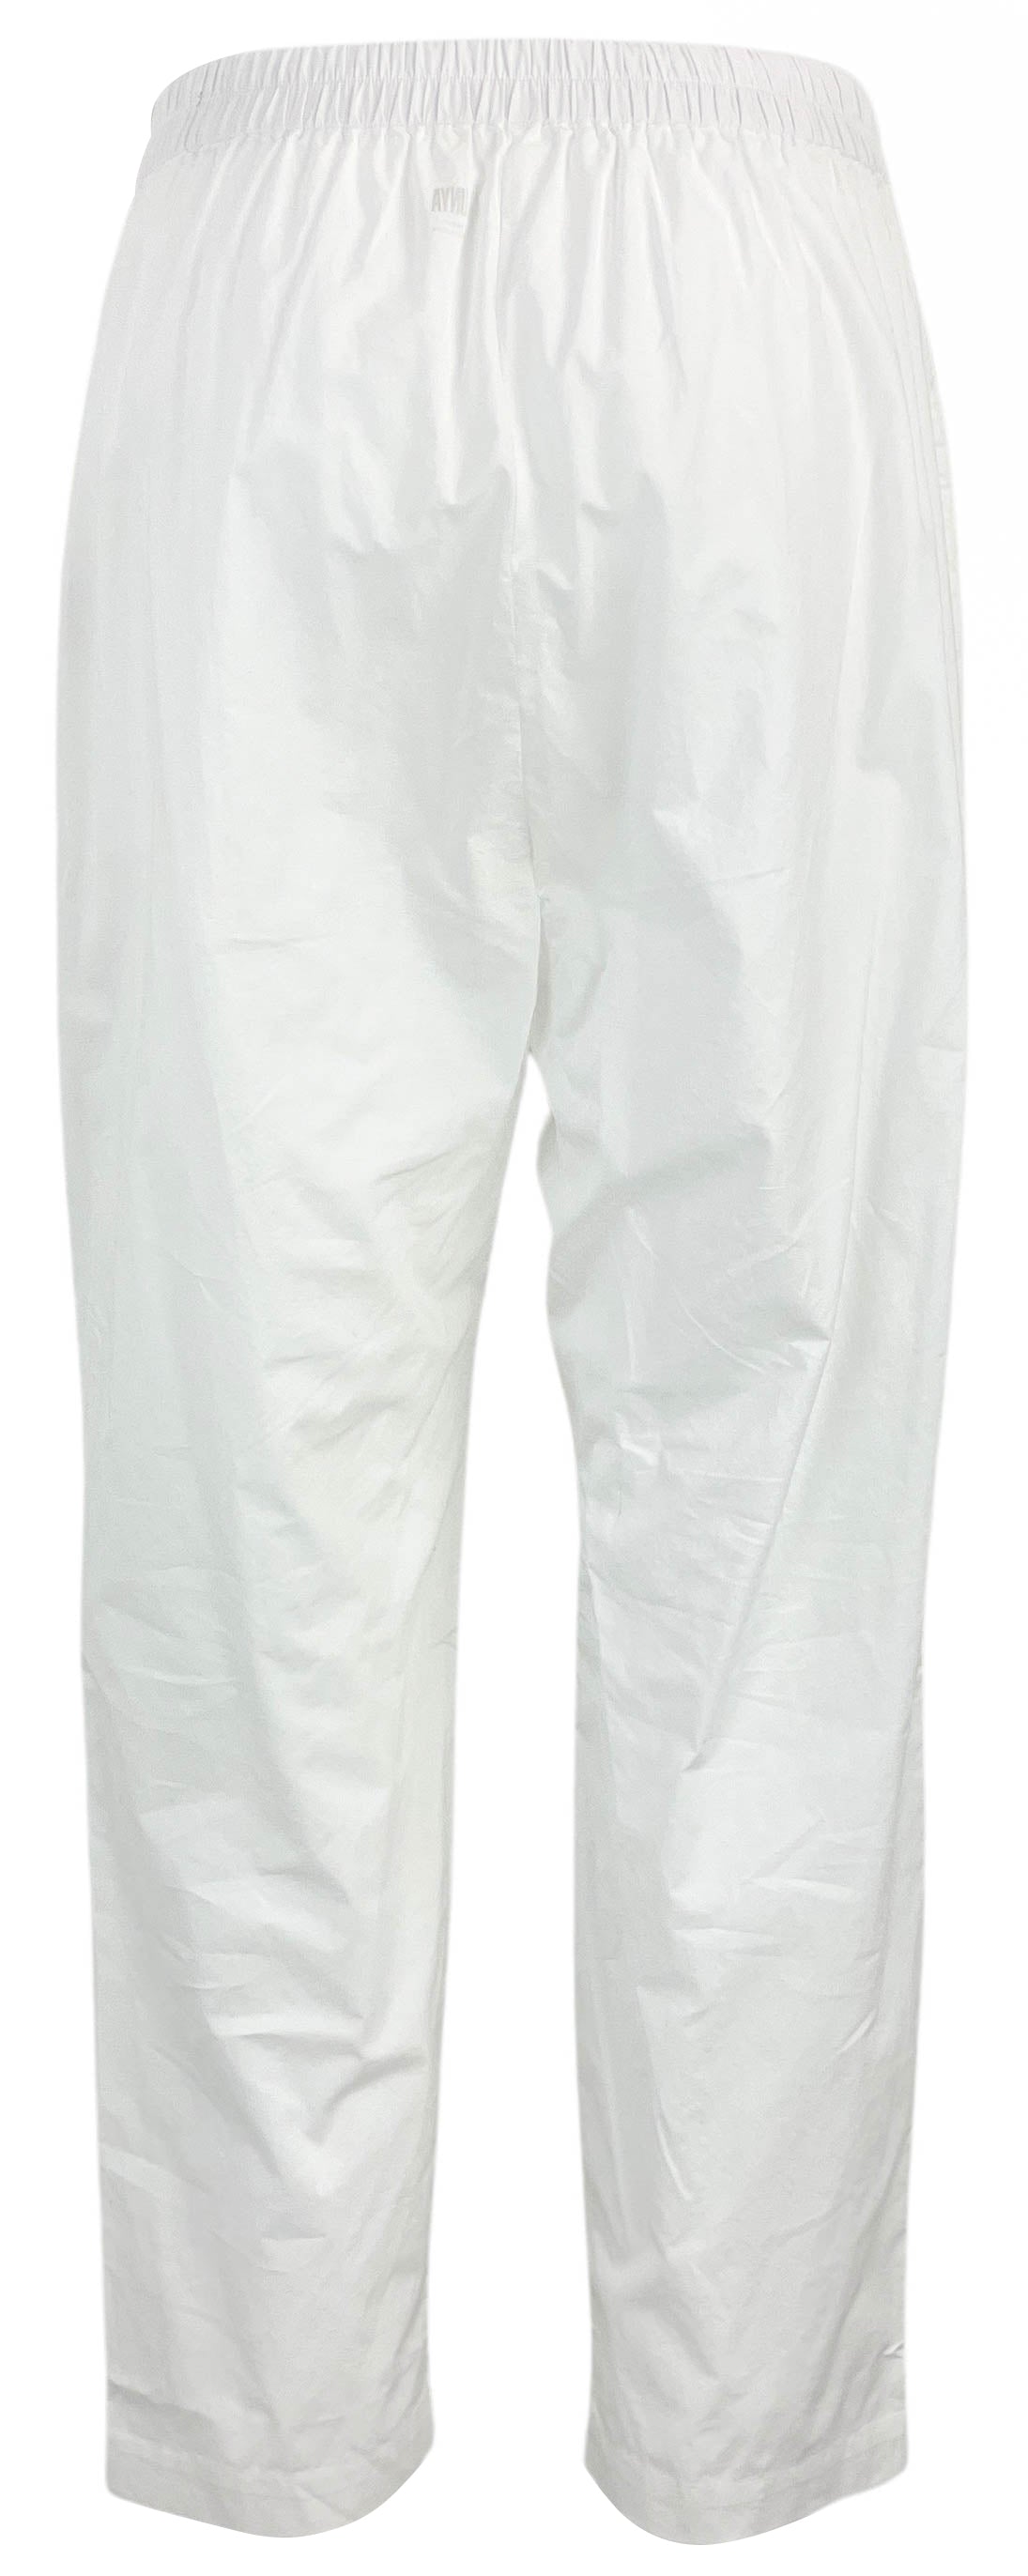 LUNYA Airy Cotton Tapered Pajama Pant in White - Discounts on LUNYA at UAL